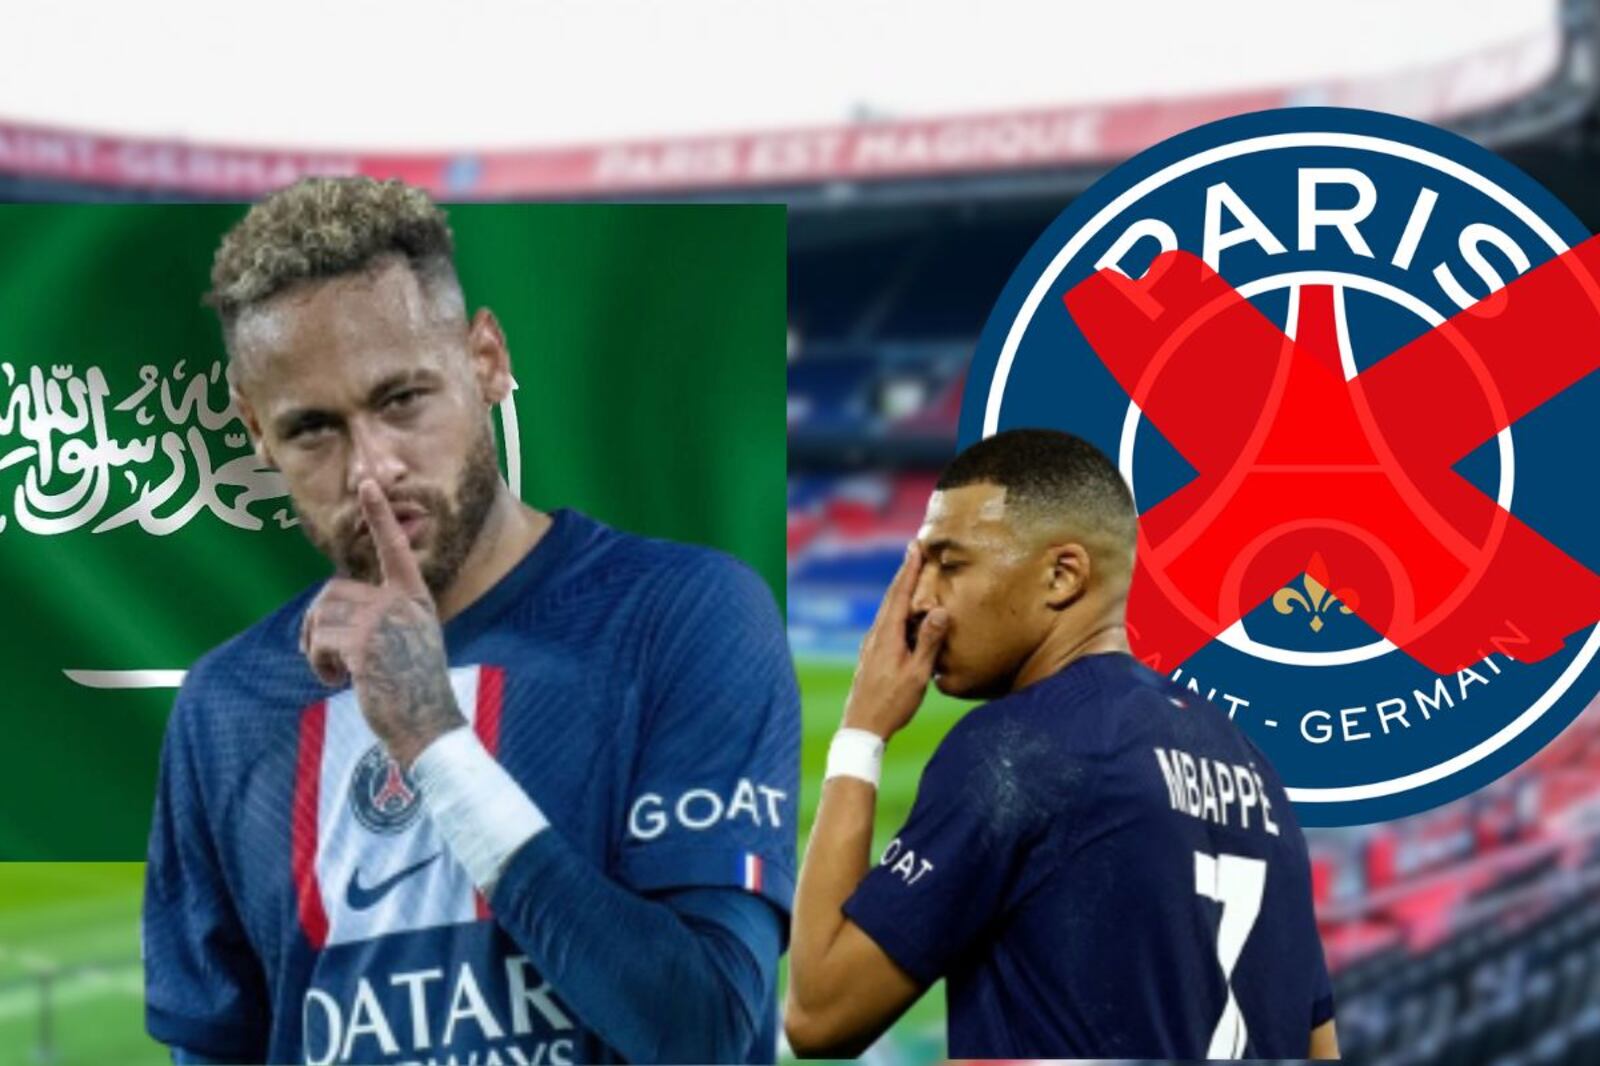 Not only because of Mbappé, the real reasons why Neymar left PSG for Arabia